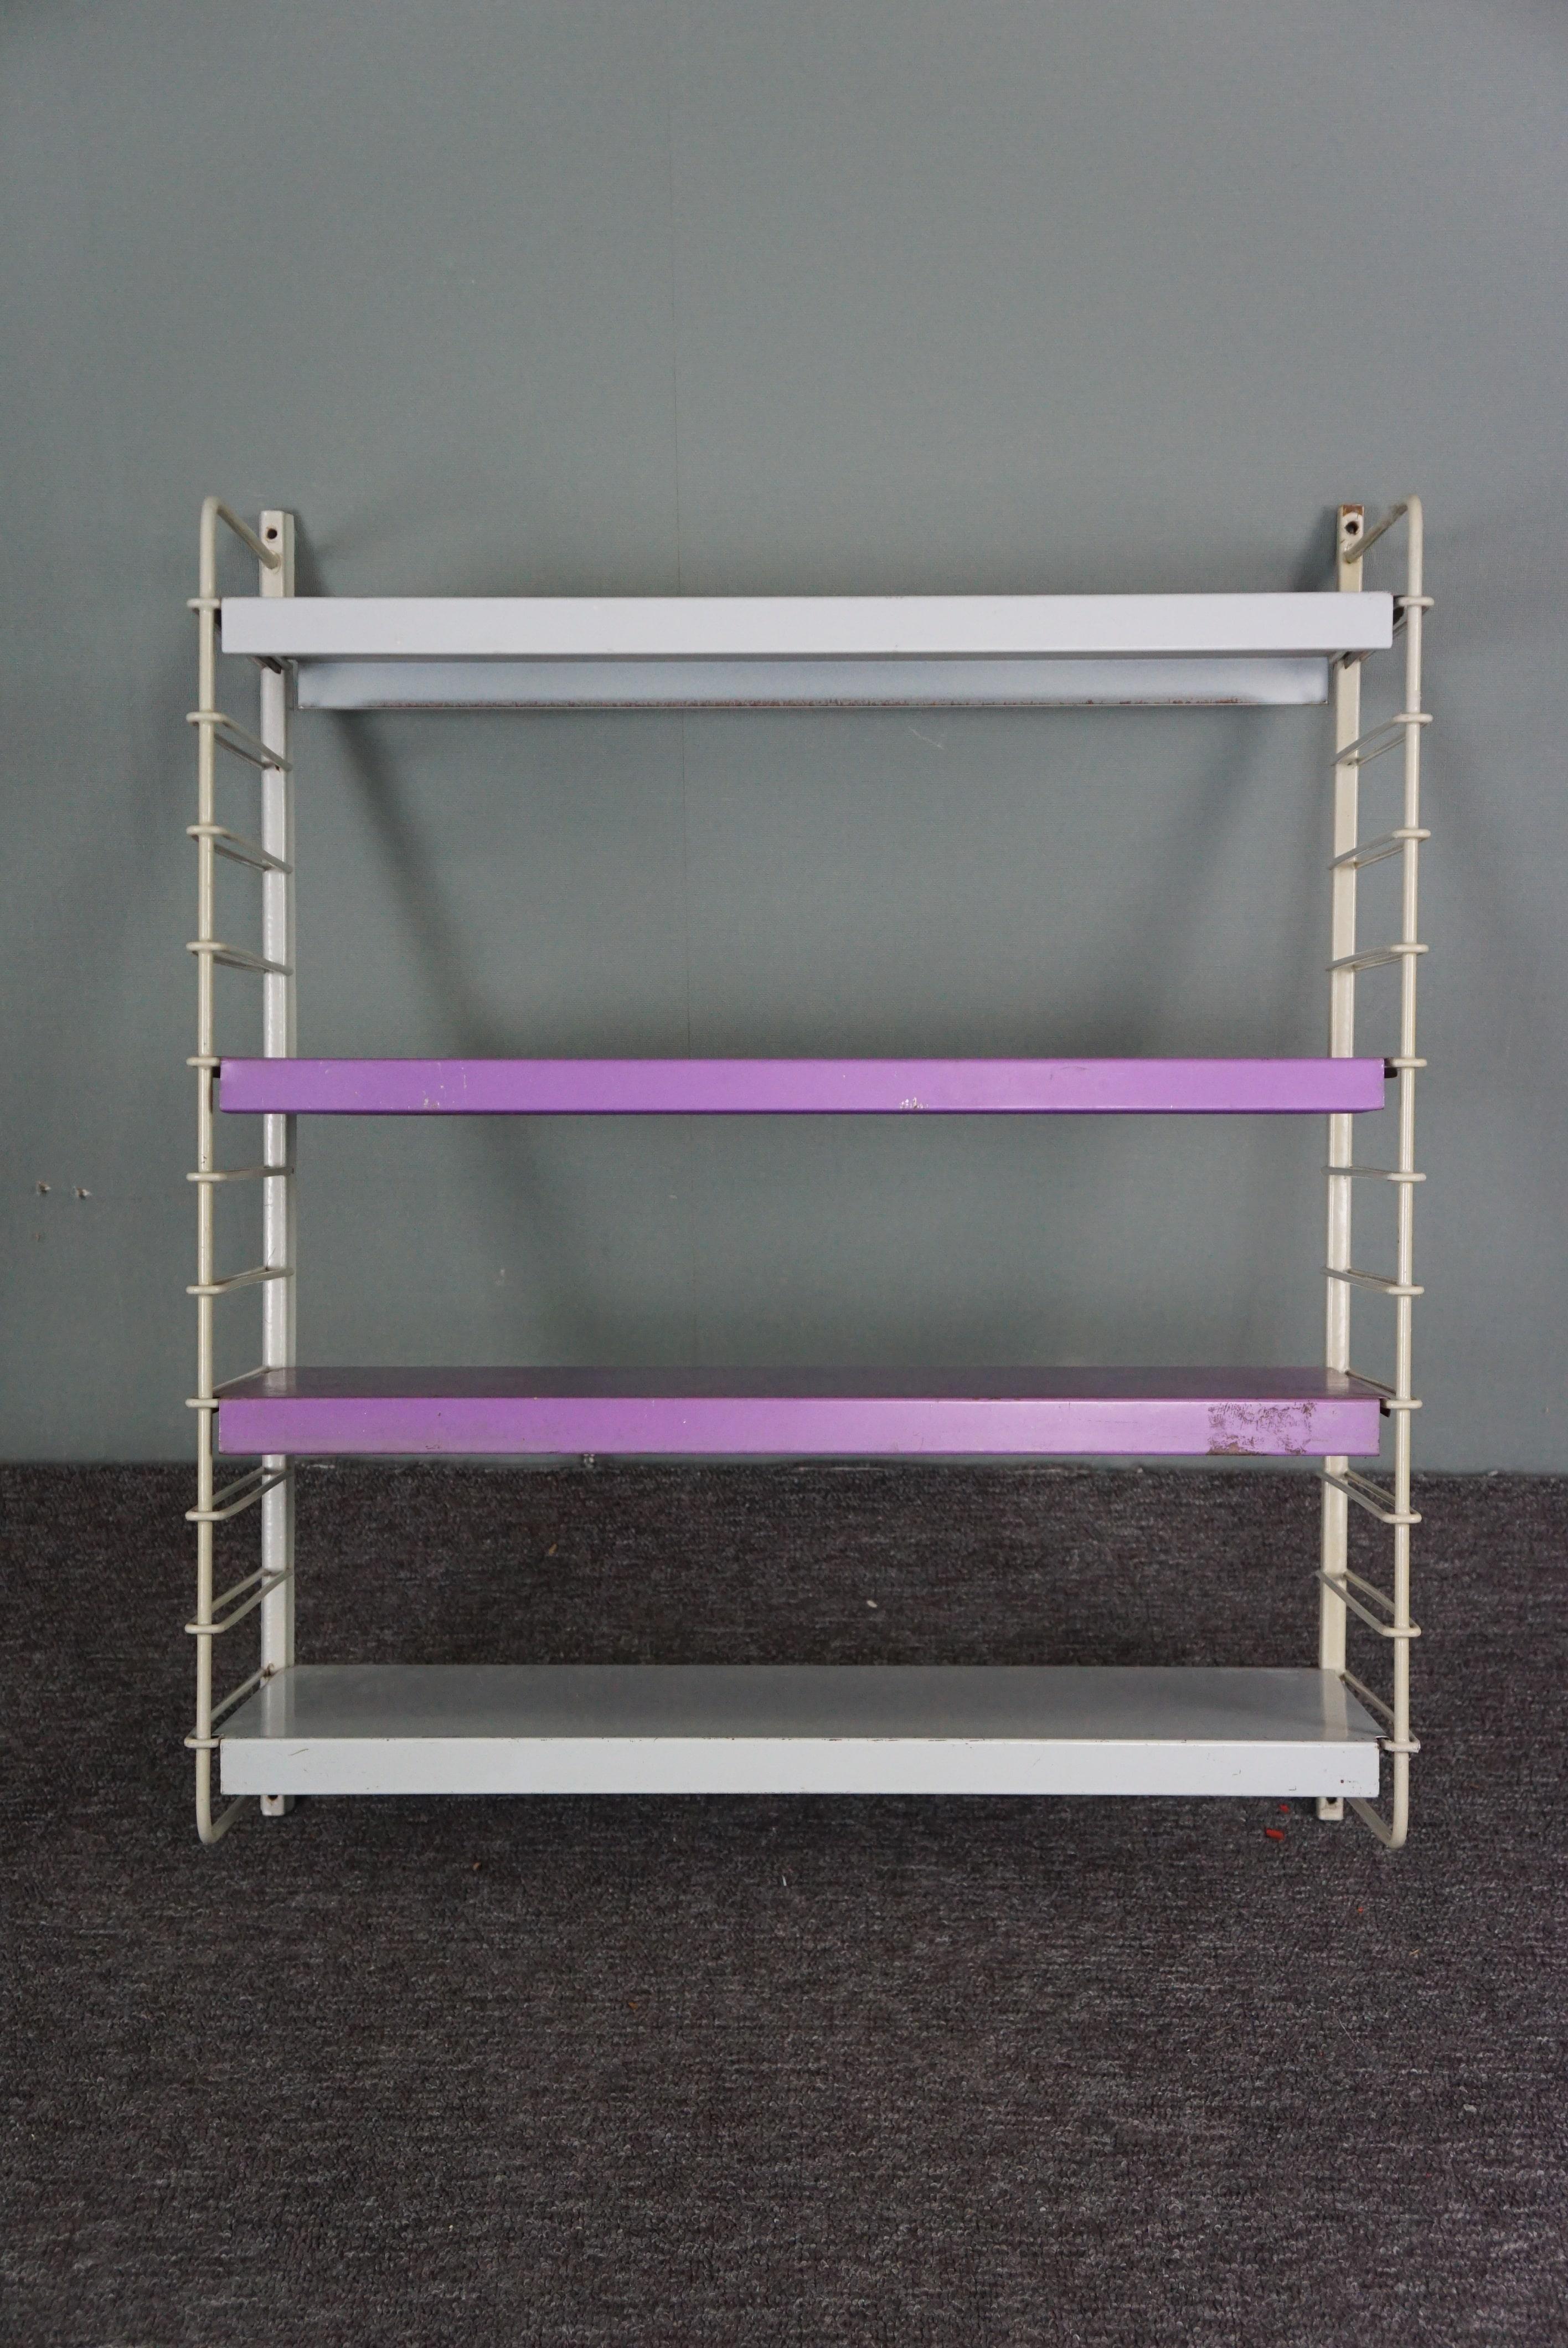 Offered is this Modernist style icon in purple and gray.

This wall rack/wall unit consists of two wall parts and four shelves which can be placed at your own discretion so that you can change/supplement the layout of this wall rack at your own